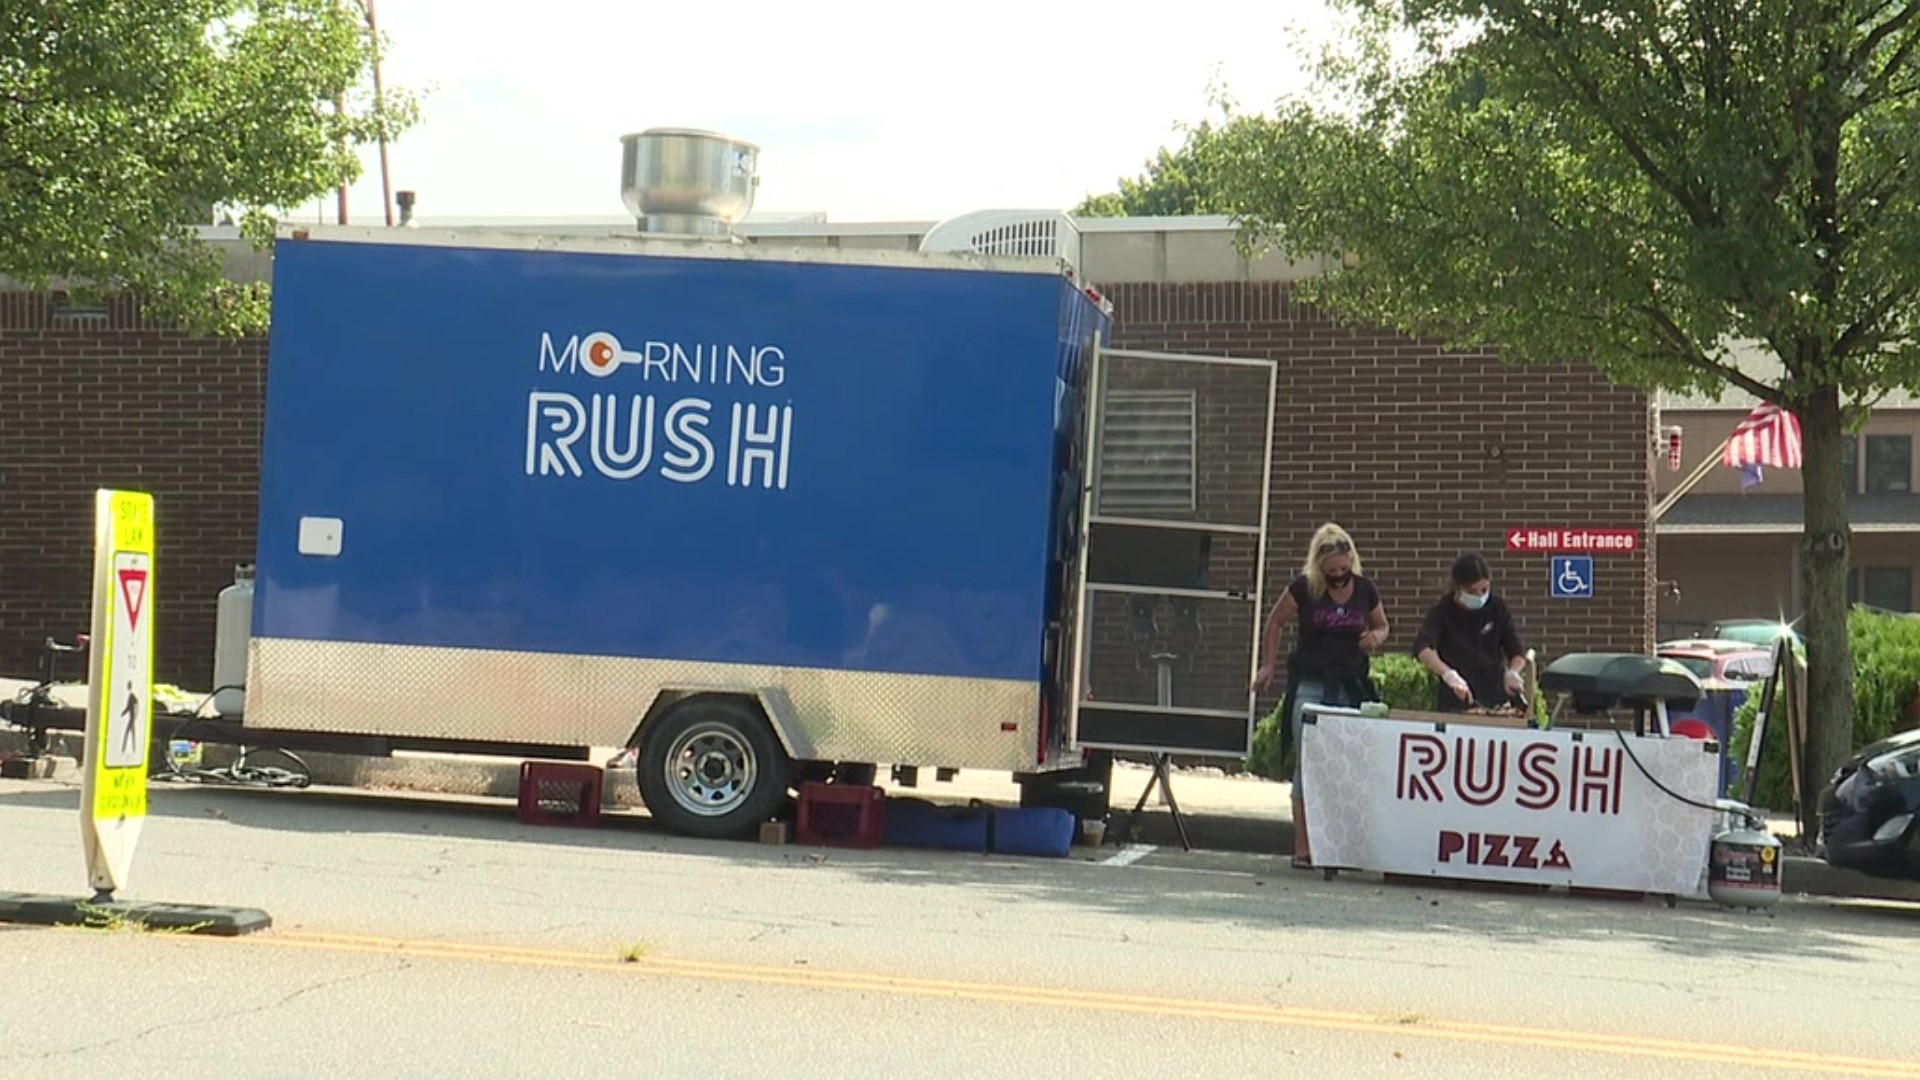 "Rush" will be providing food, drinks, merchandise and it's all mobilized.